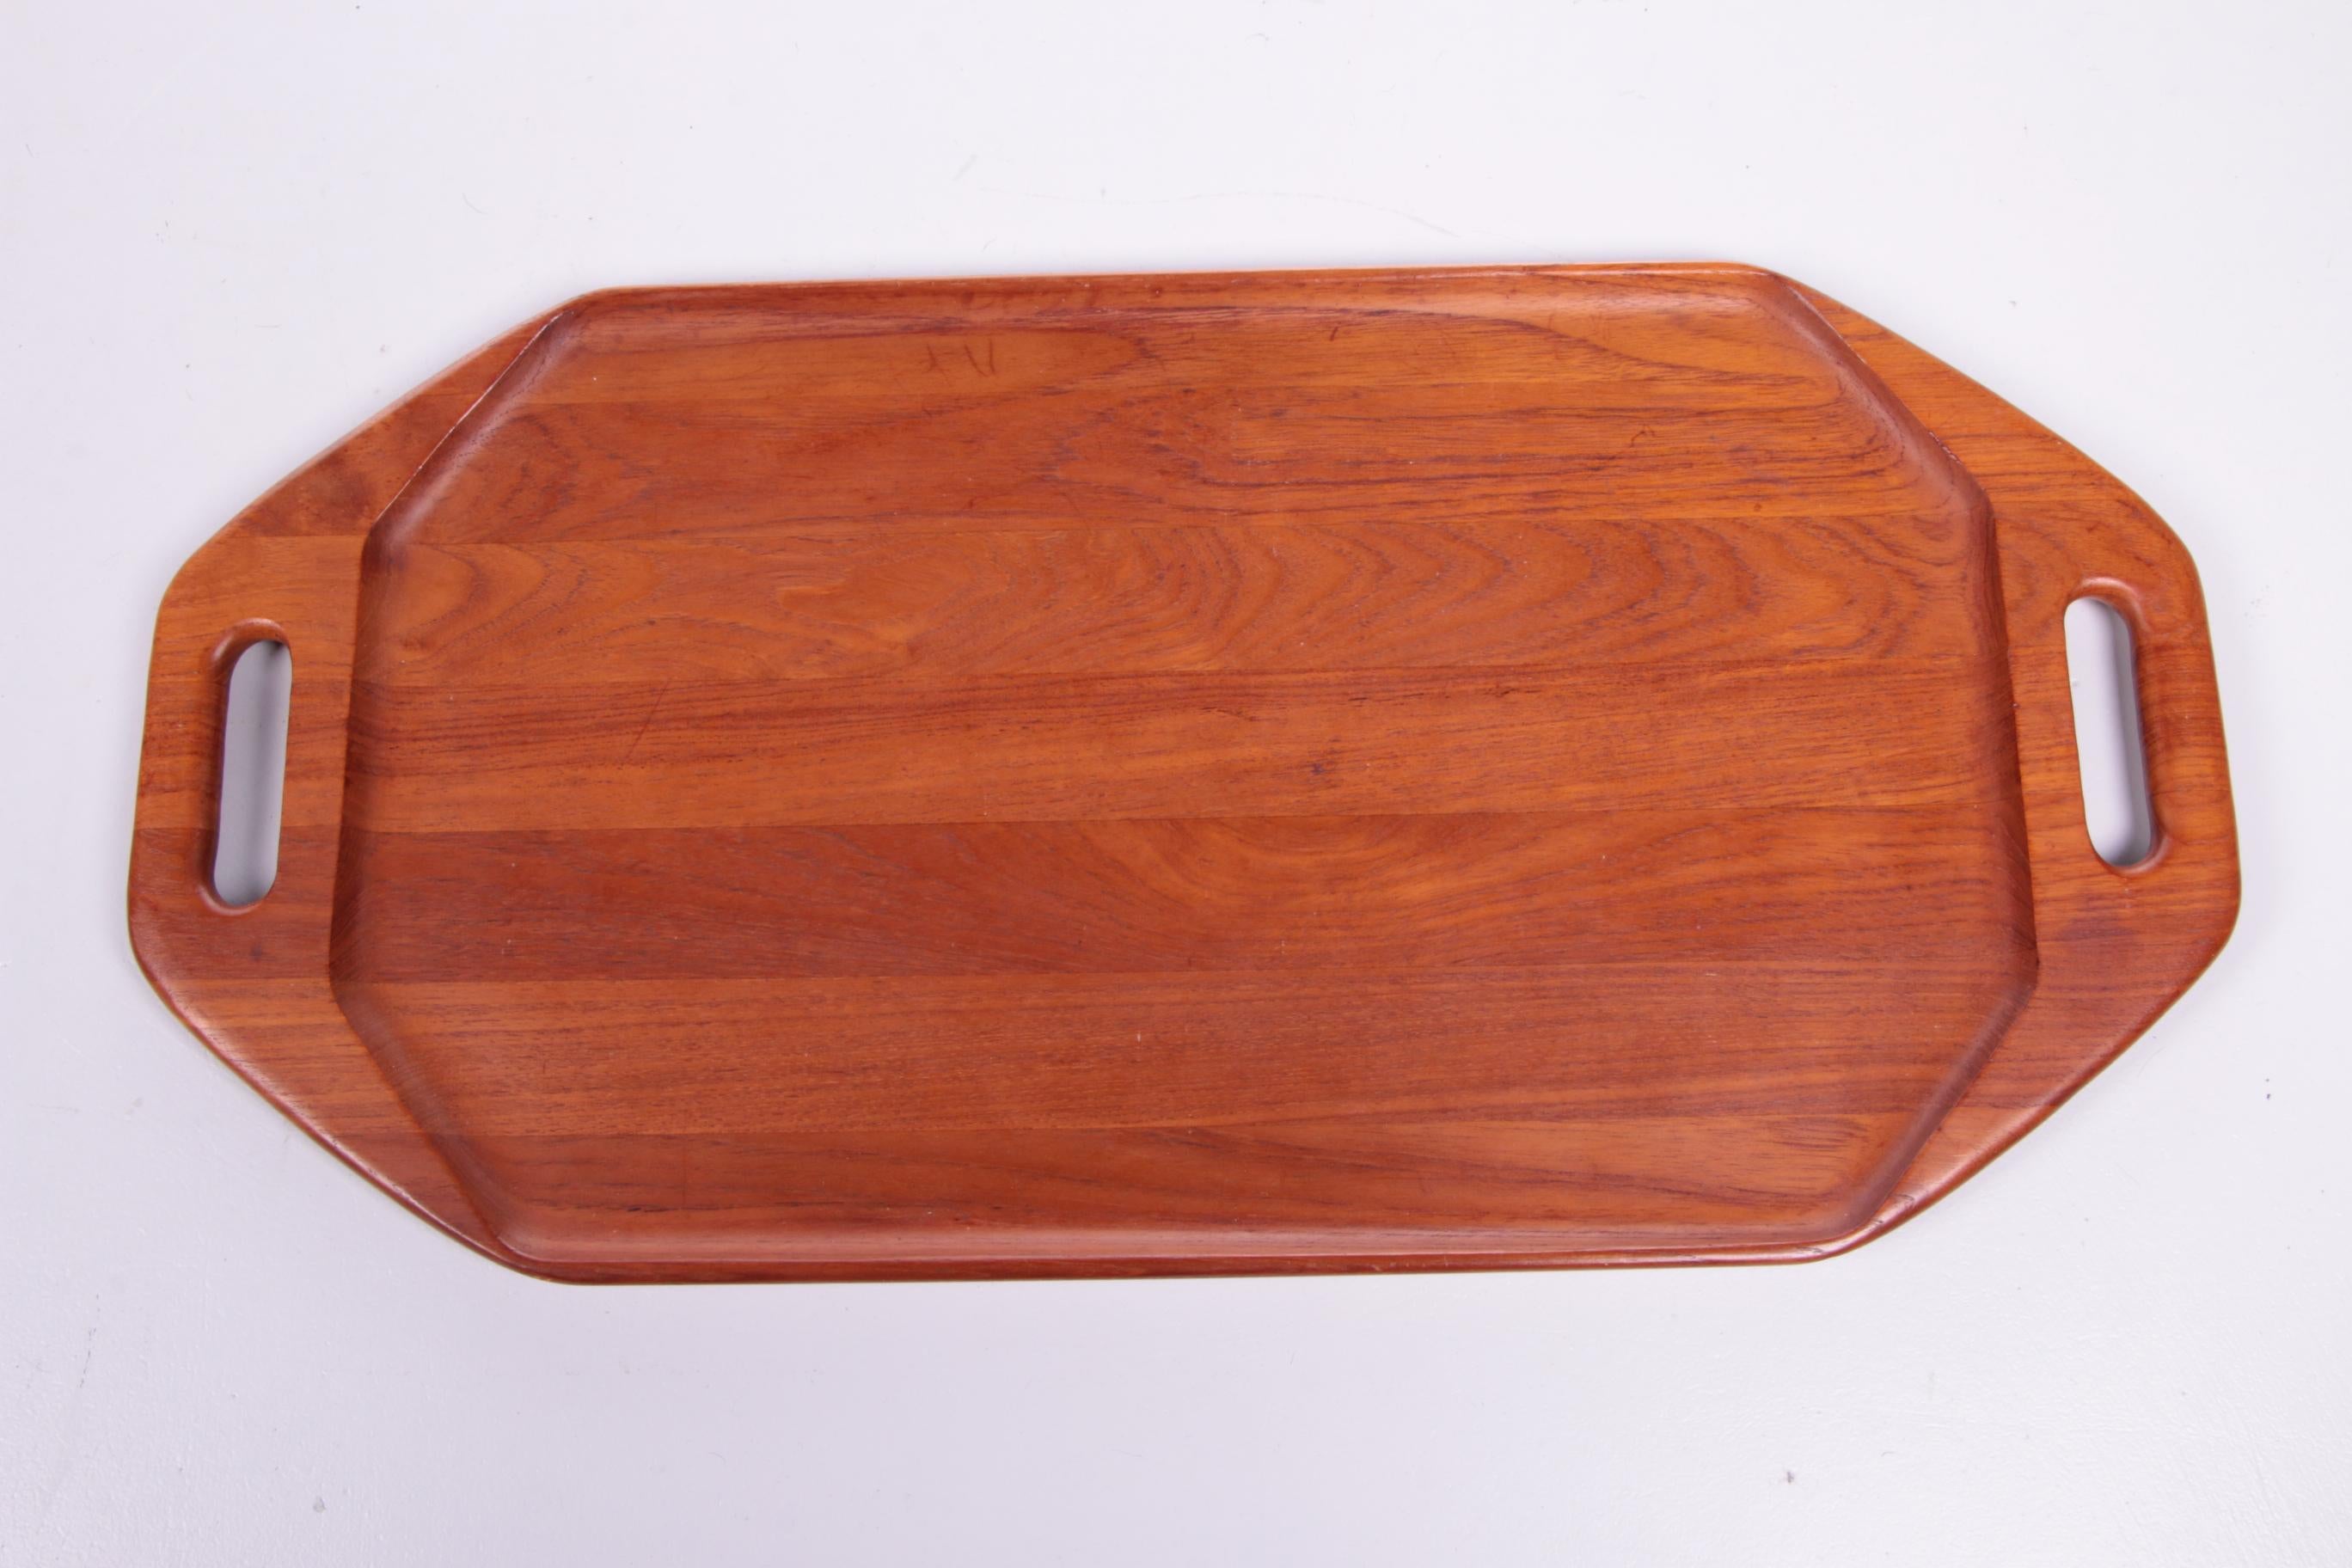 A beautiful teak Digsmed Denmark tray.

This vintage item stands out because of its high-quality and organically finished teak top.

The top feels soft and has a smooth finish, pure Danish craftsmanship.

The colors in the wood are beautiful and